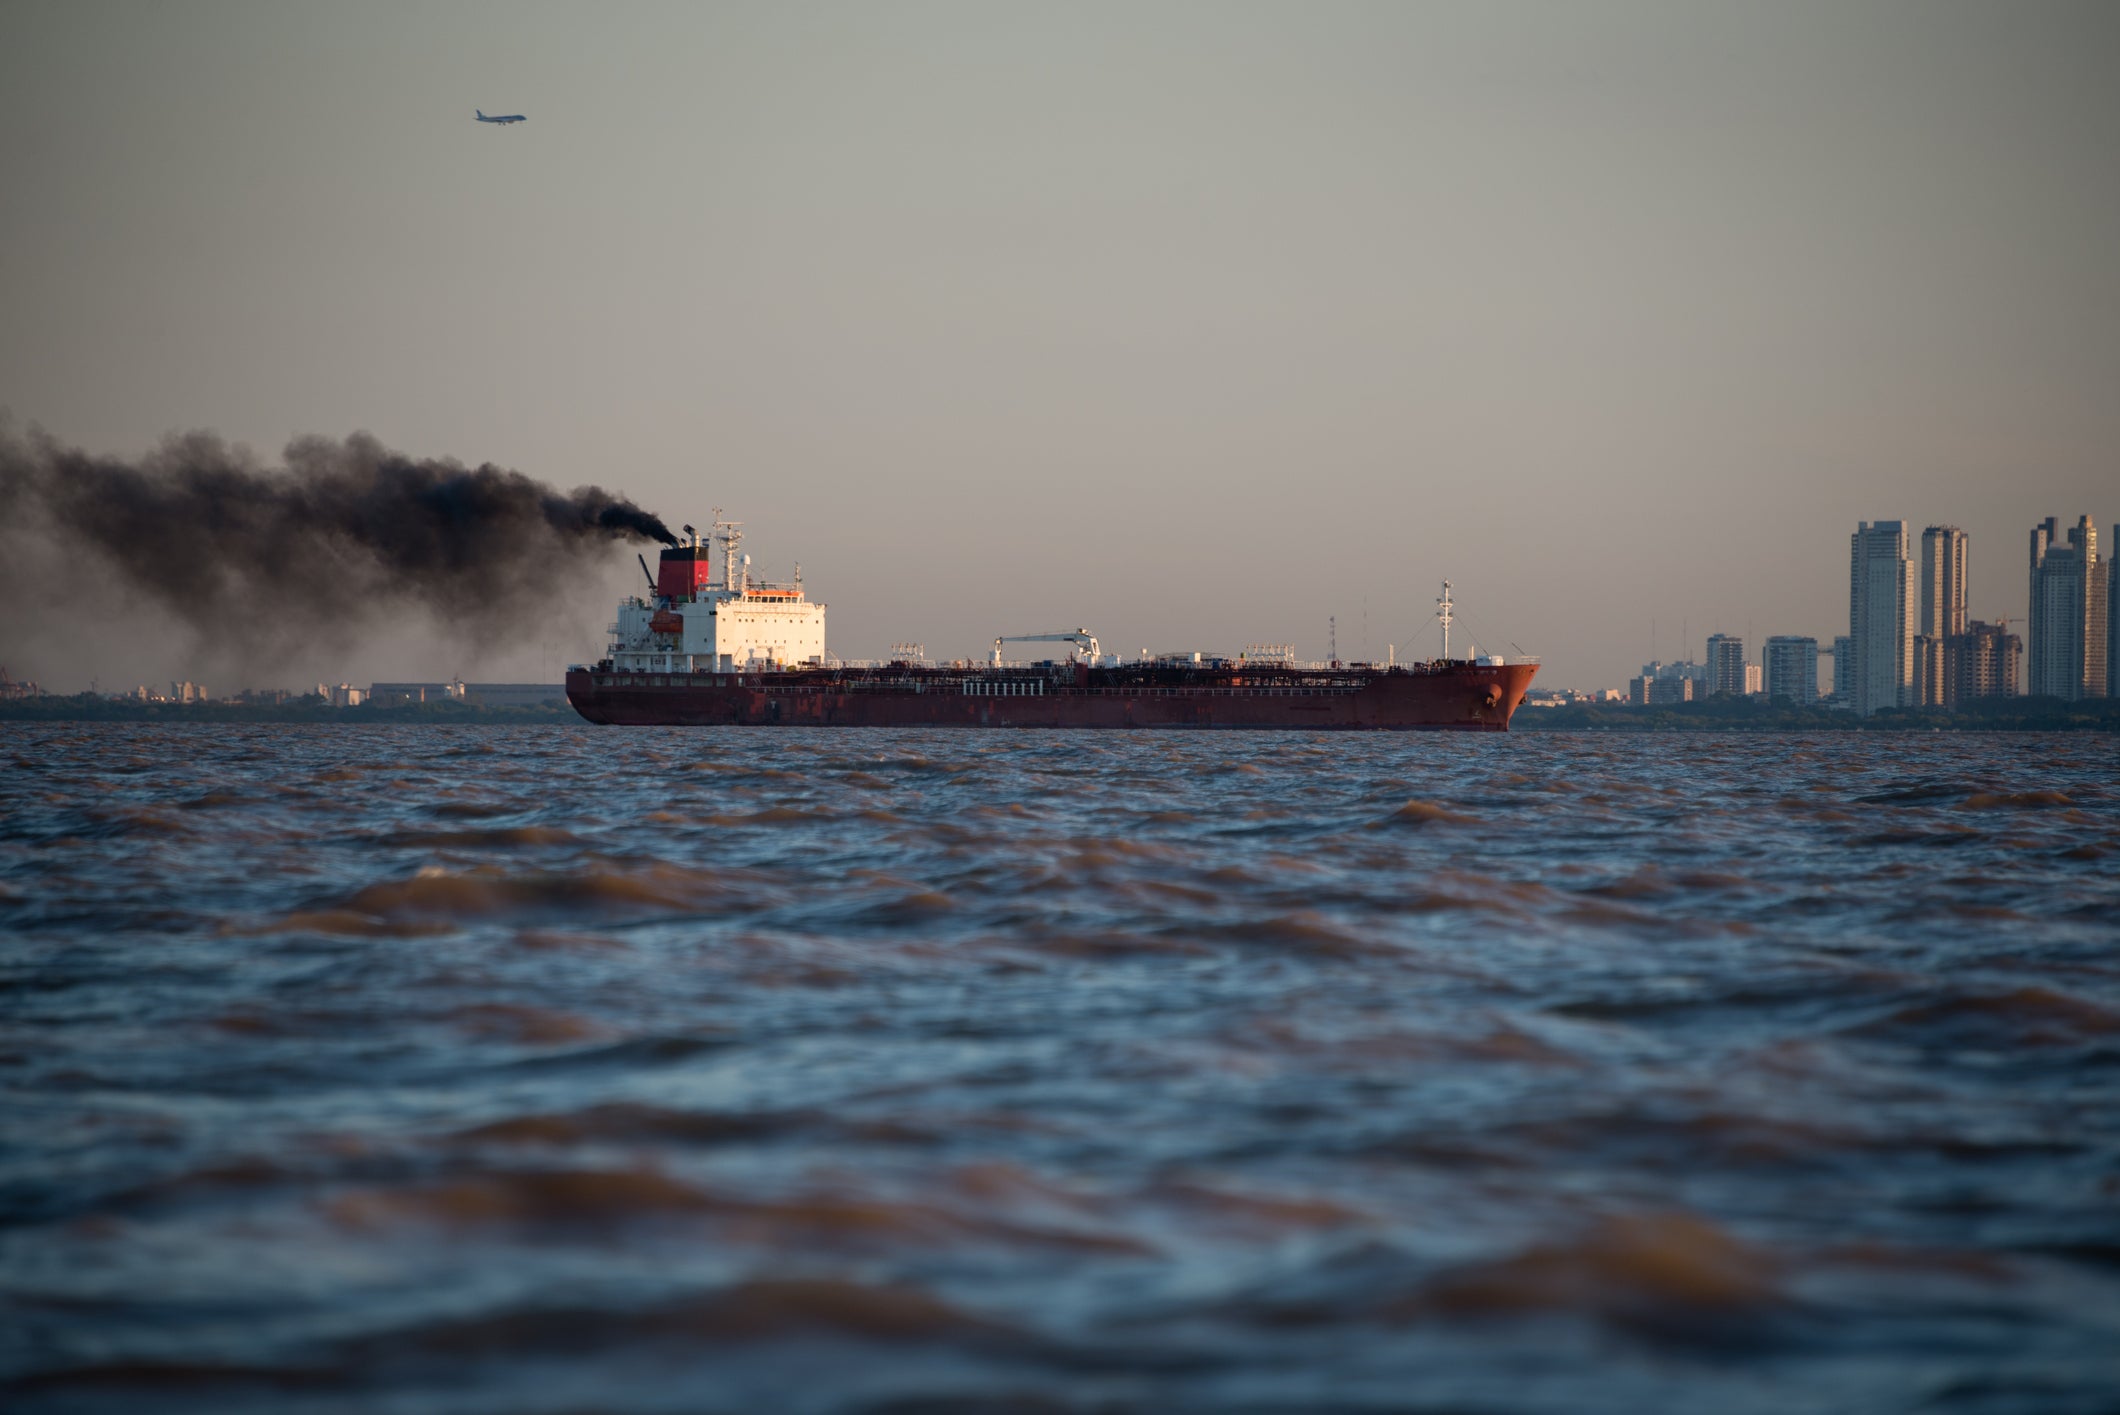 Maritime emissions are not currently counted in CO2 targets